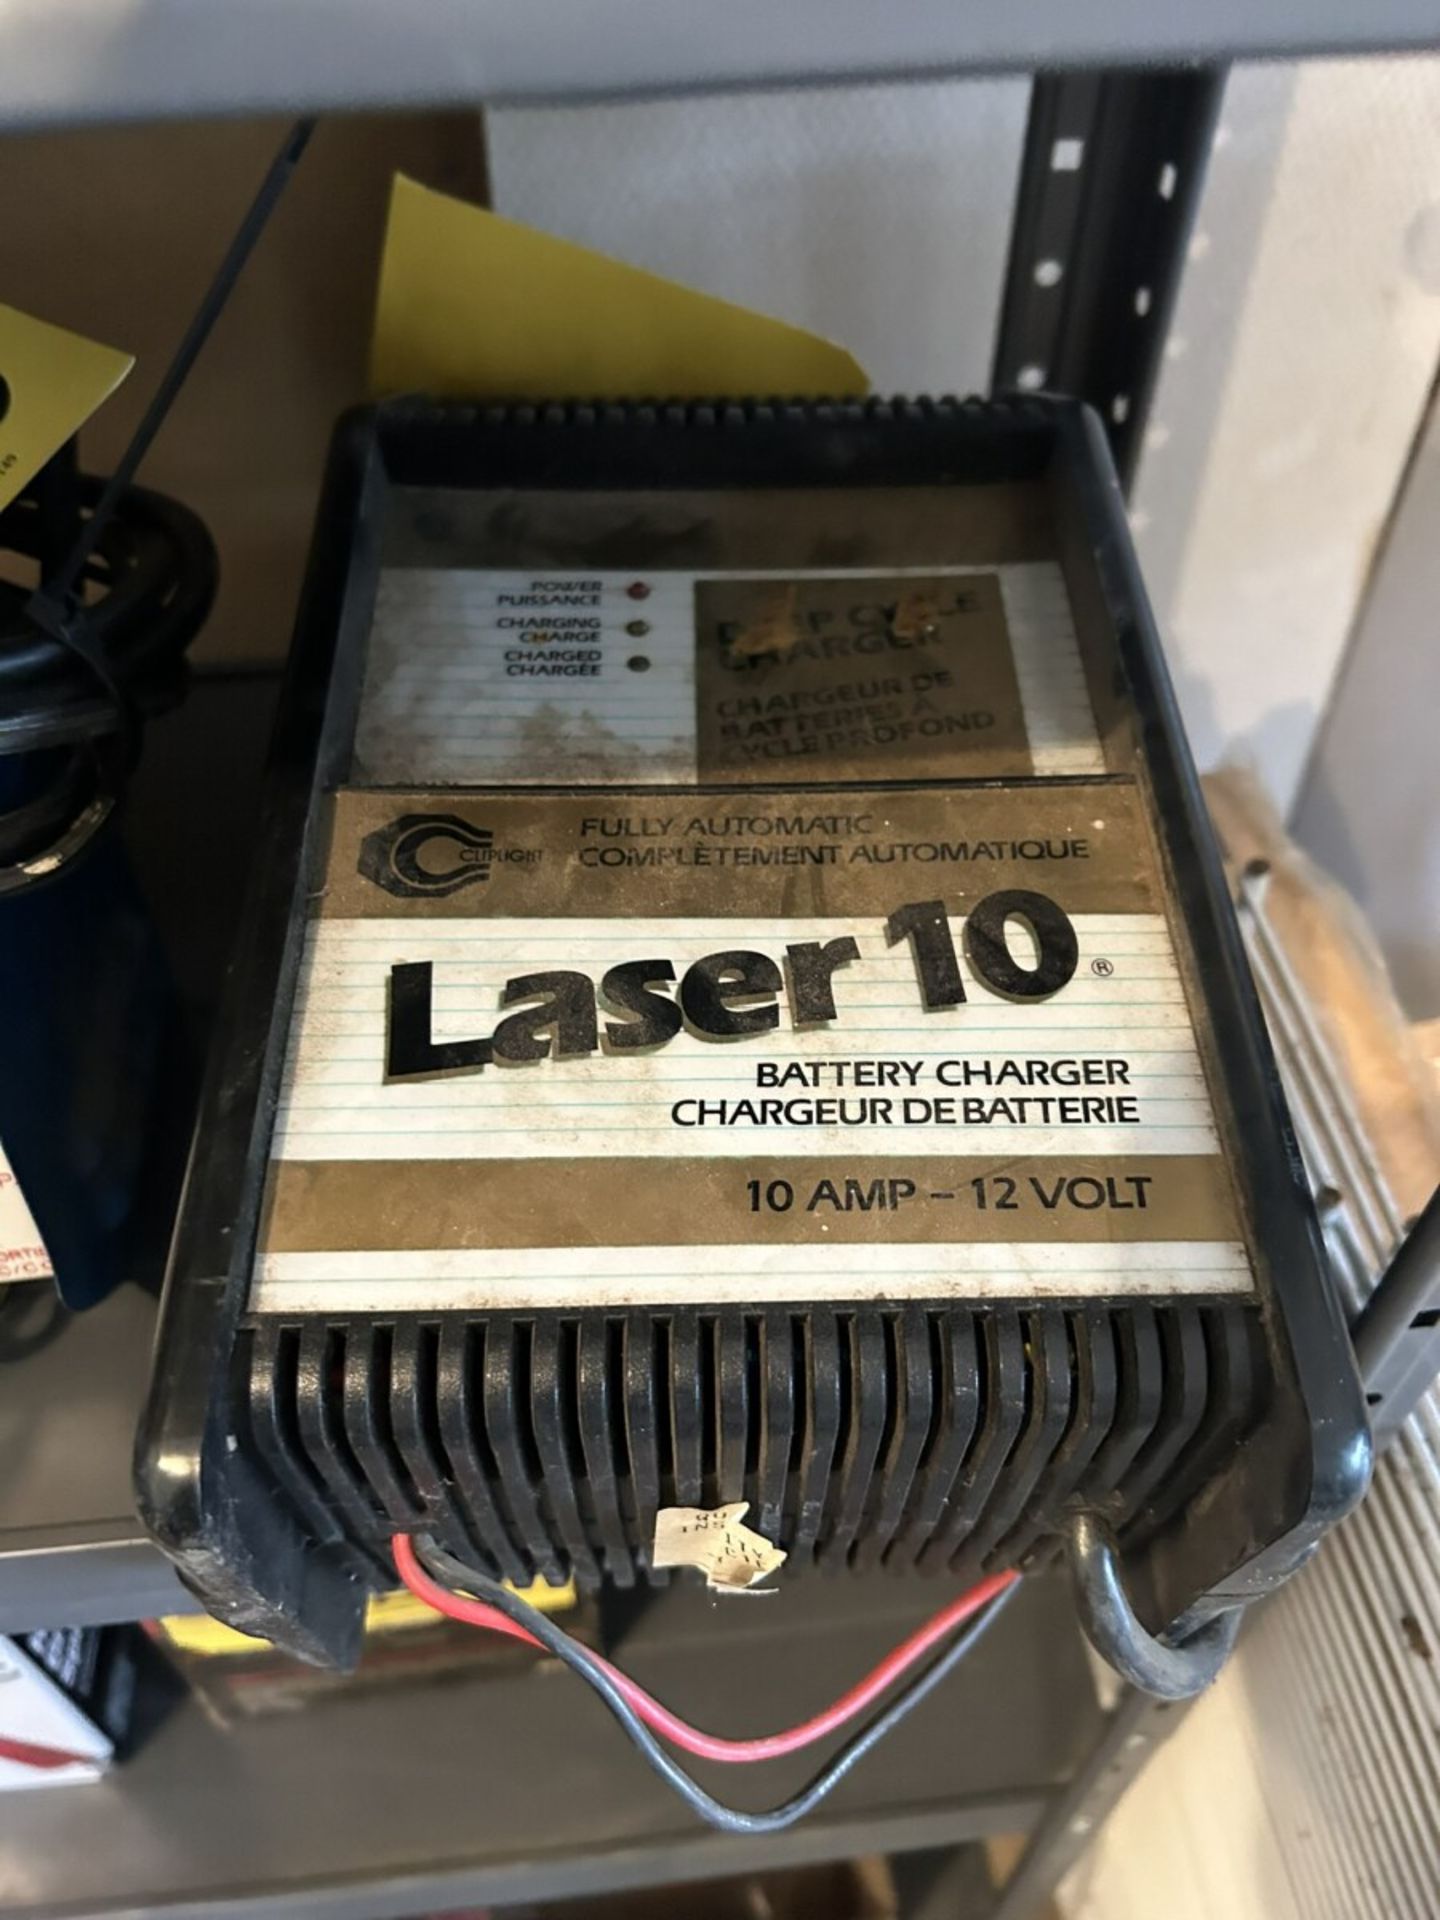 LASER 10 & SEARS BATTERY CHARGERS - Image 2 of 2